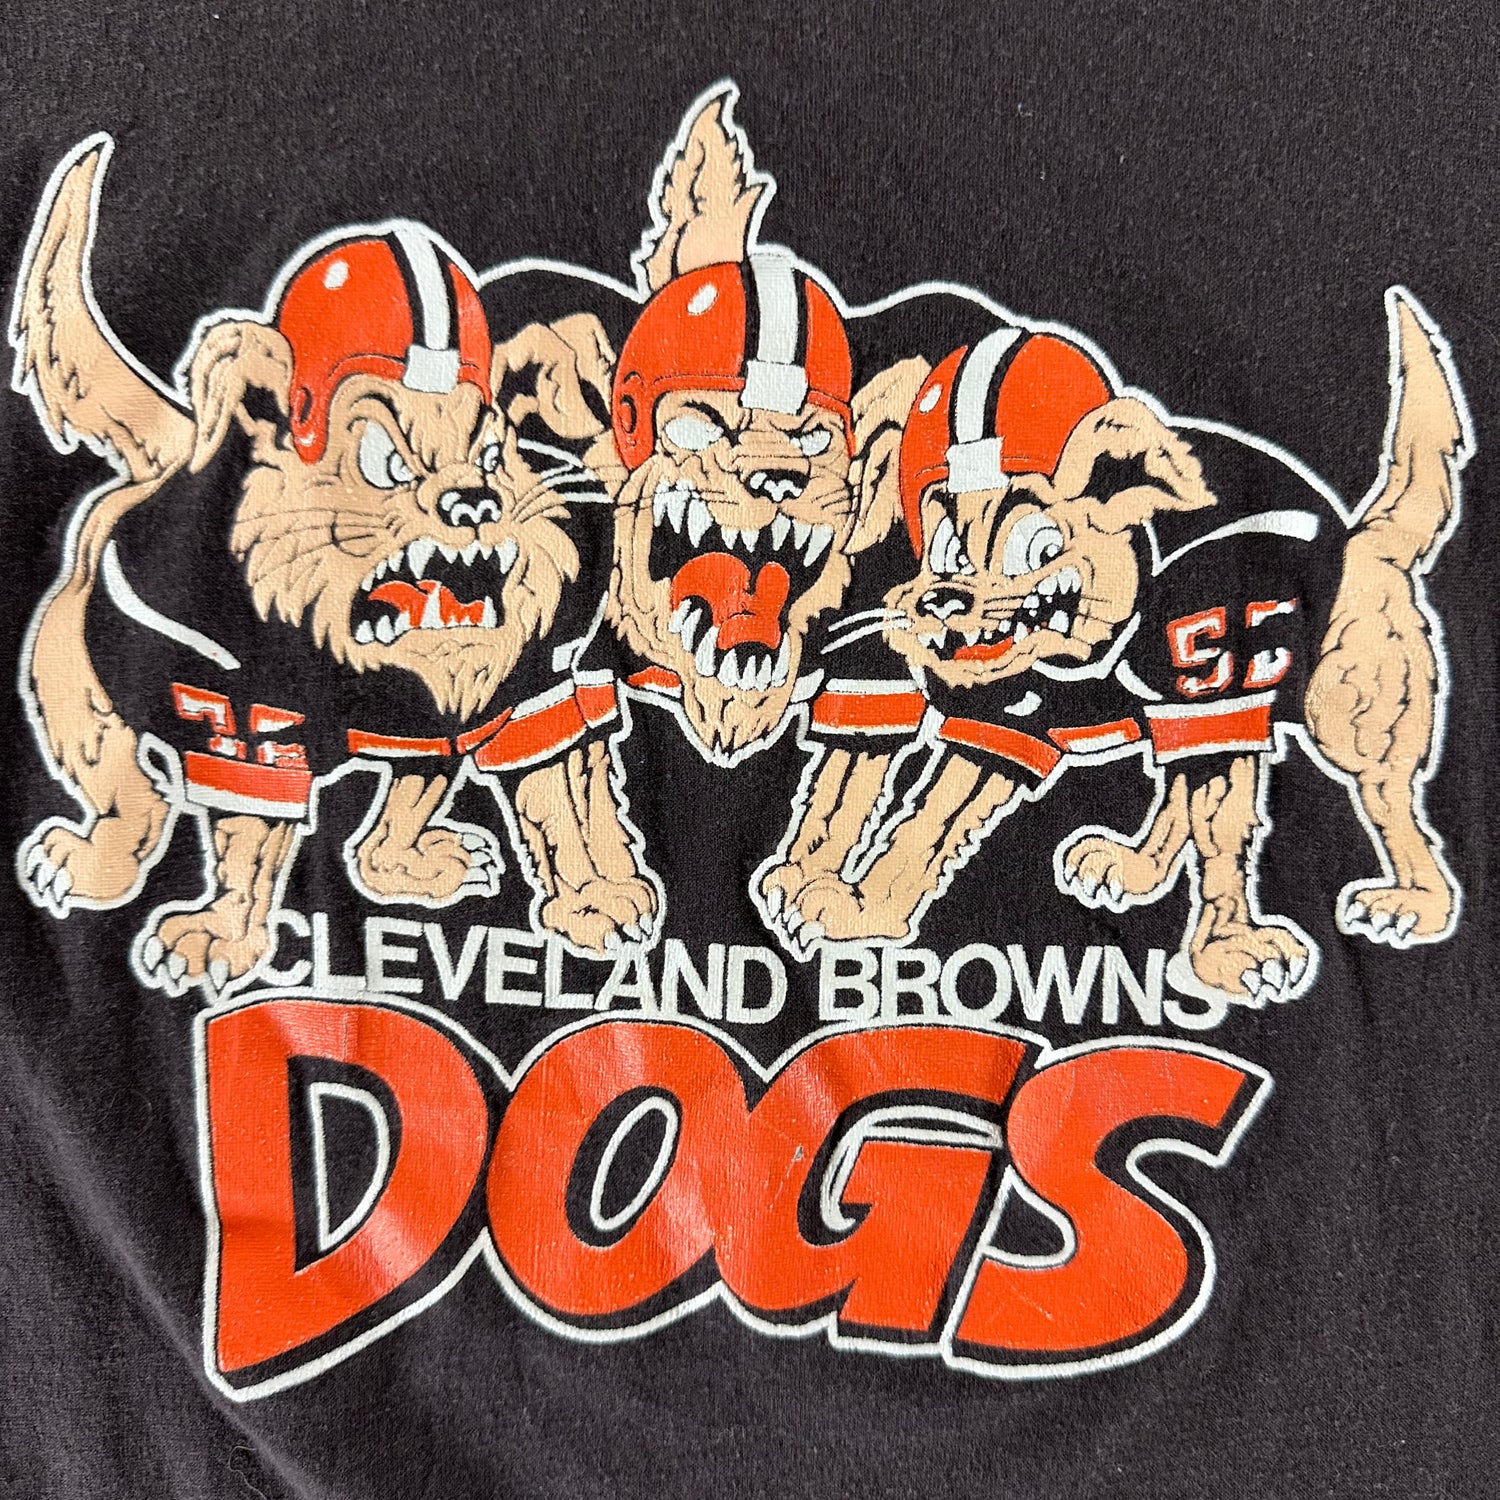 Vintage 1980s Cleveland Browns T-shirt size Small